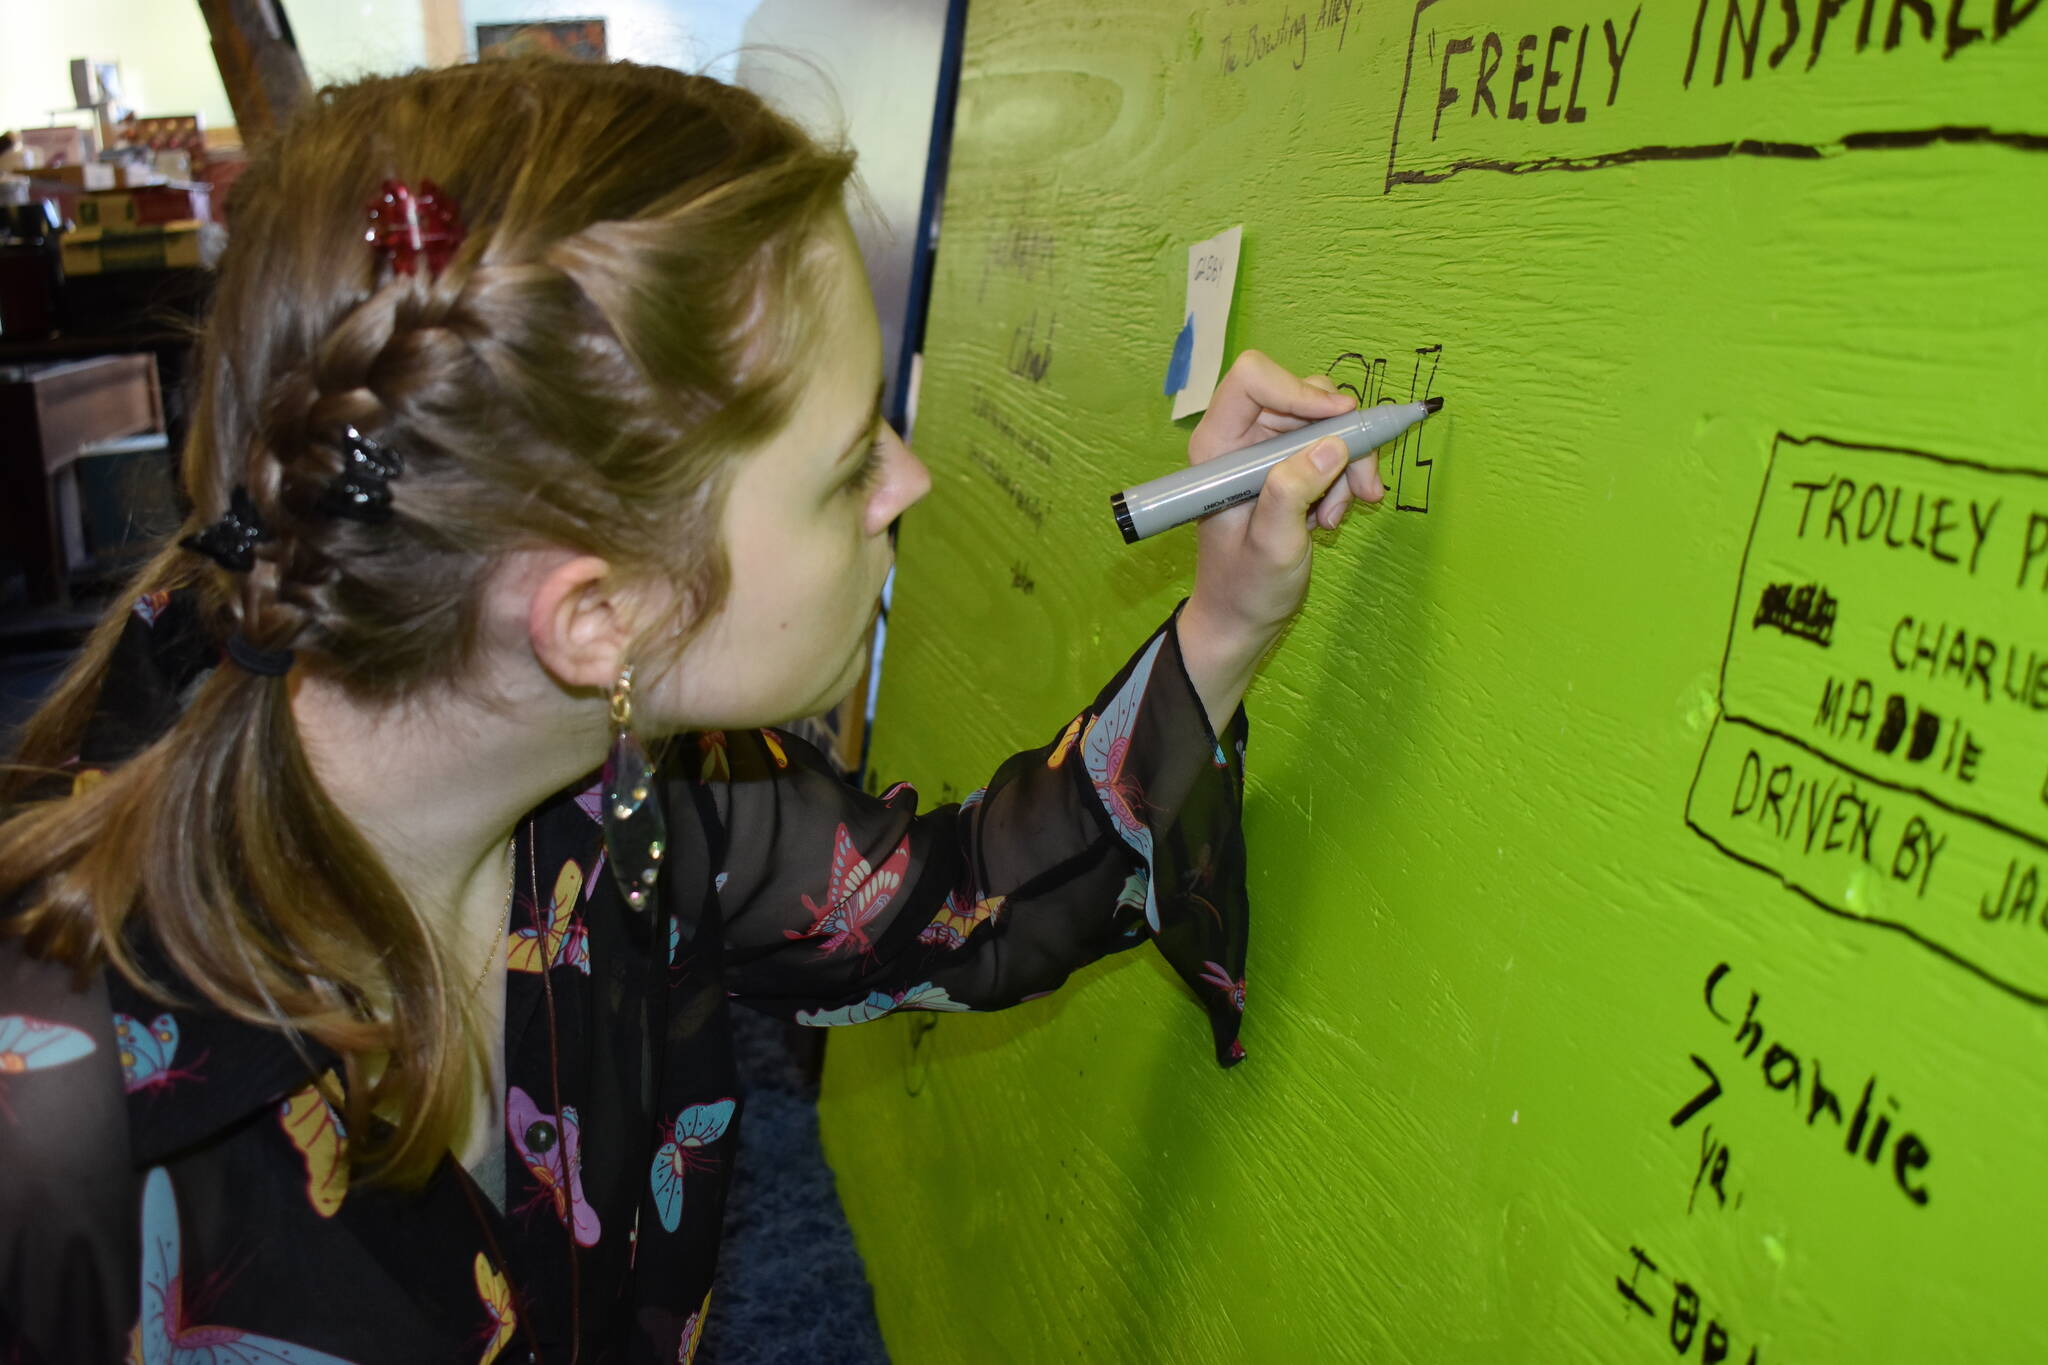 Matthew N. Wells / The Daily World
Chloe Long, a 16-year-old artist from Cosmopolis, signs her name on the back of one of the panels that will hopefully hang on the E Street side of the Cosi Art Center — 1136 1st St., in Cosmopolis. She was part of a collective of young talent who created a heavily-detailed “diptych” of early Cosmopolis that should hang for years to come.